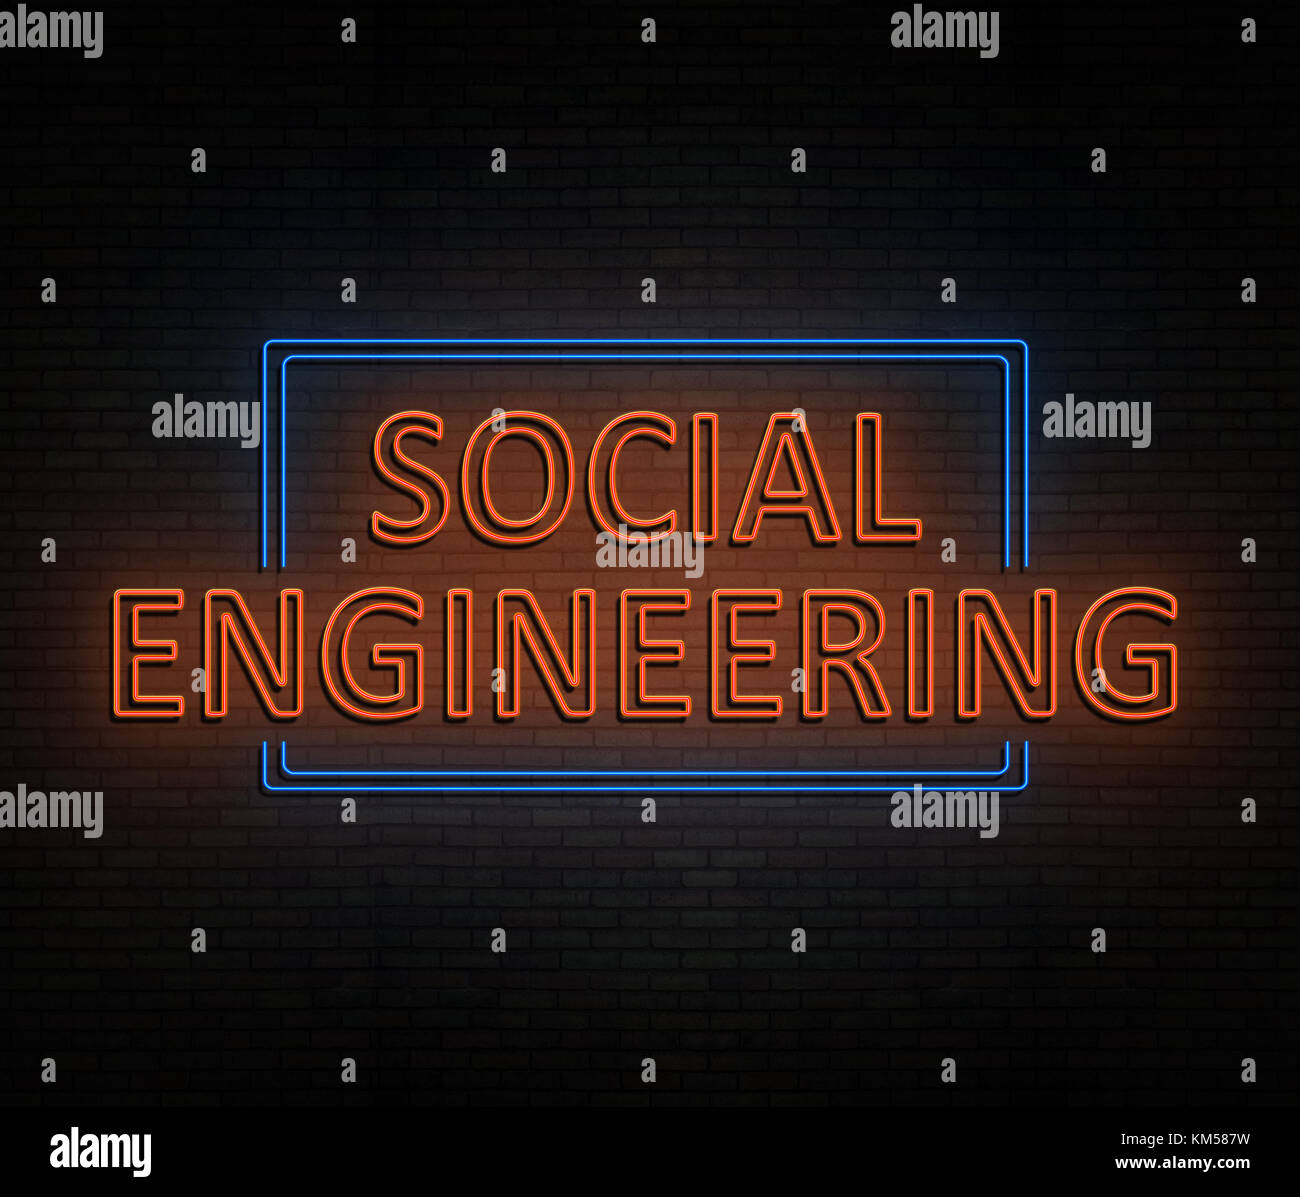 3d Illustration depicting an illuminated neon sign with a social engineering concept. Stock Photo